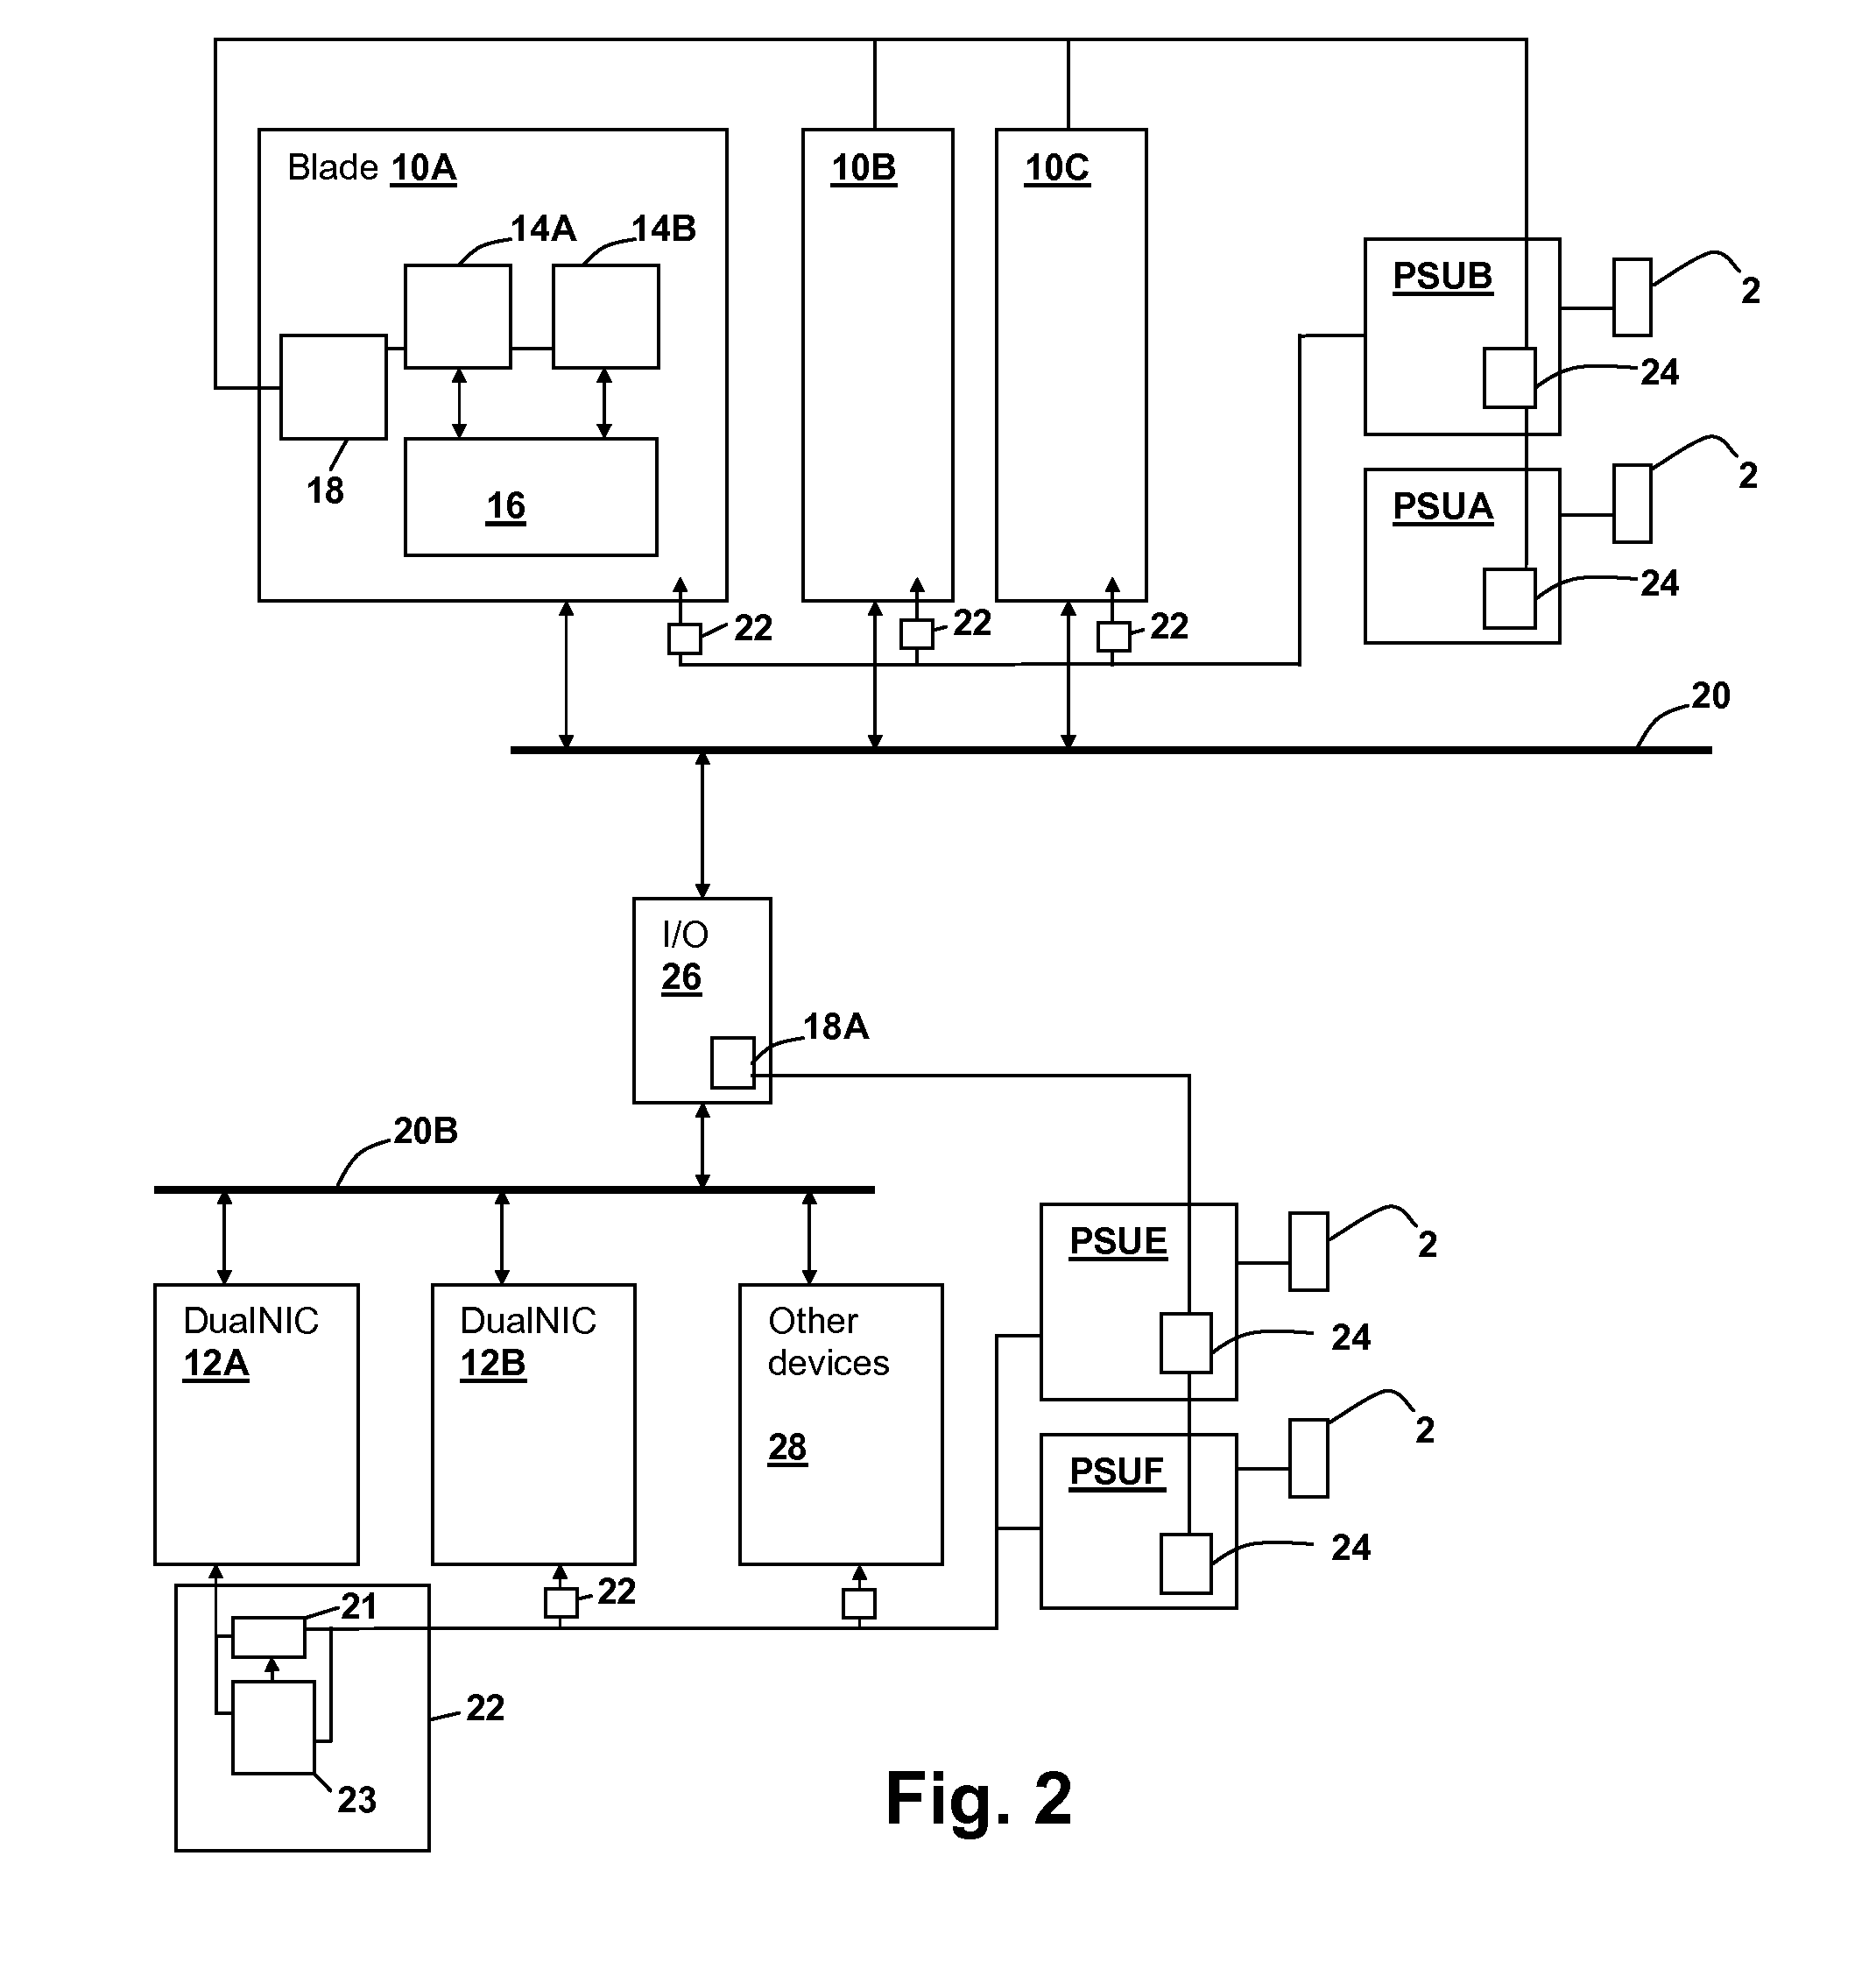 Power bus current bounding using local current-limiting soft-switches and device requirements information